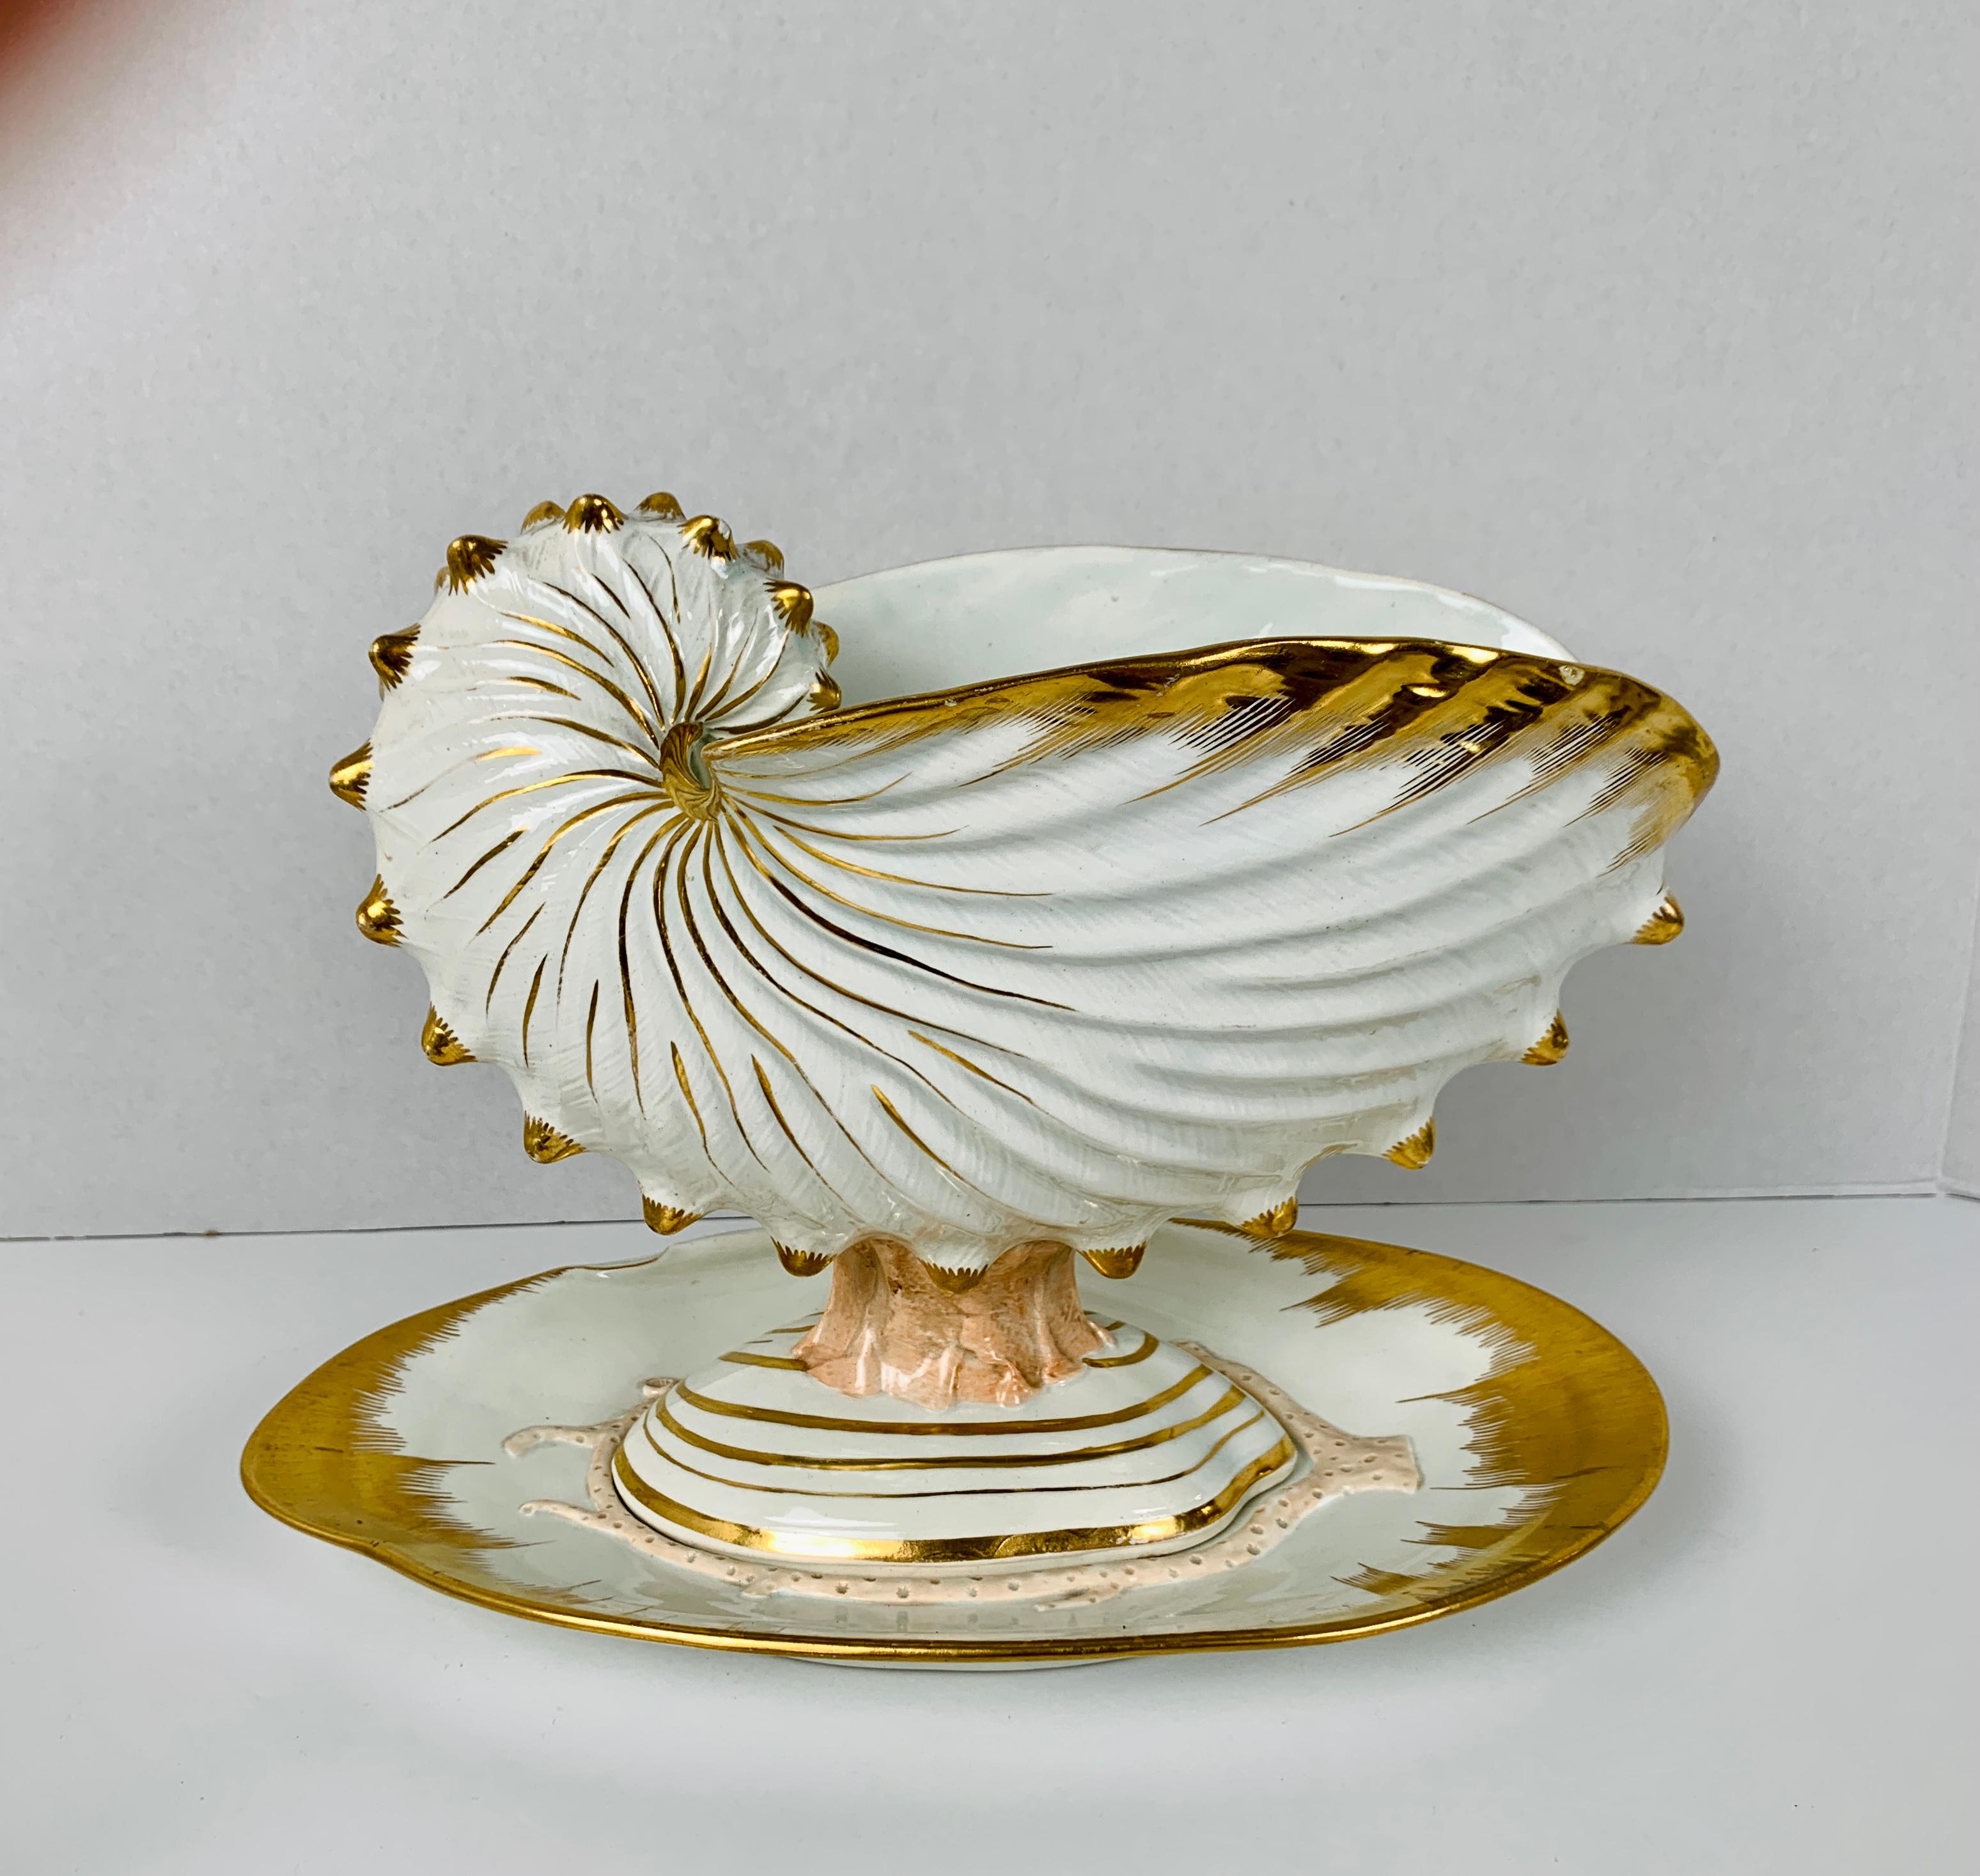 Made in England by Wedgwood circa 1820, this is an exquisite dessert service in excellent condition.
Josiah Wedgwood, who founded the Wedgwood company in the mid-1700s was an avid shell collector.
Under his management, the Wedgwood factory made